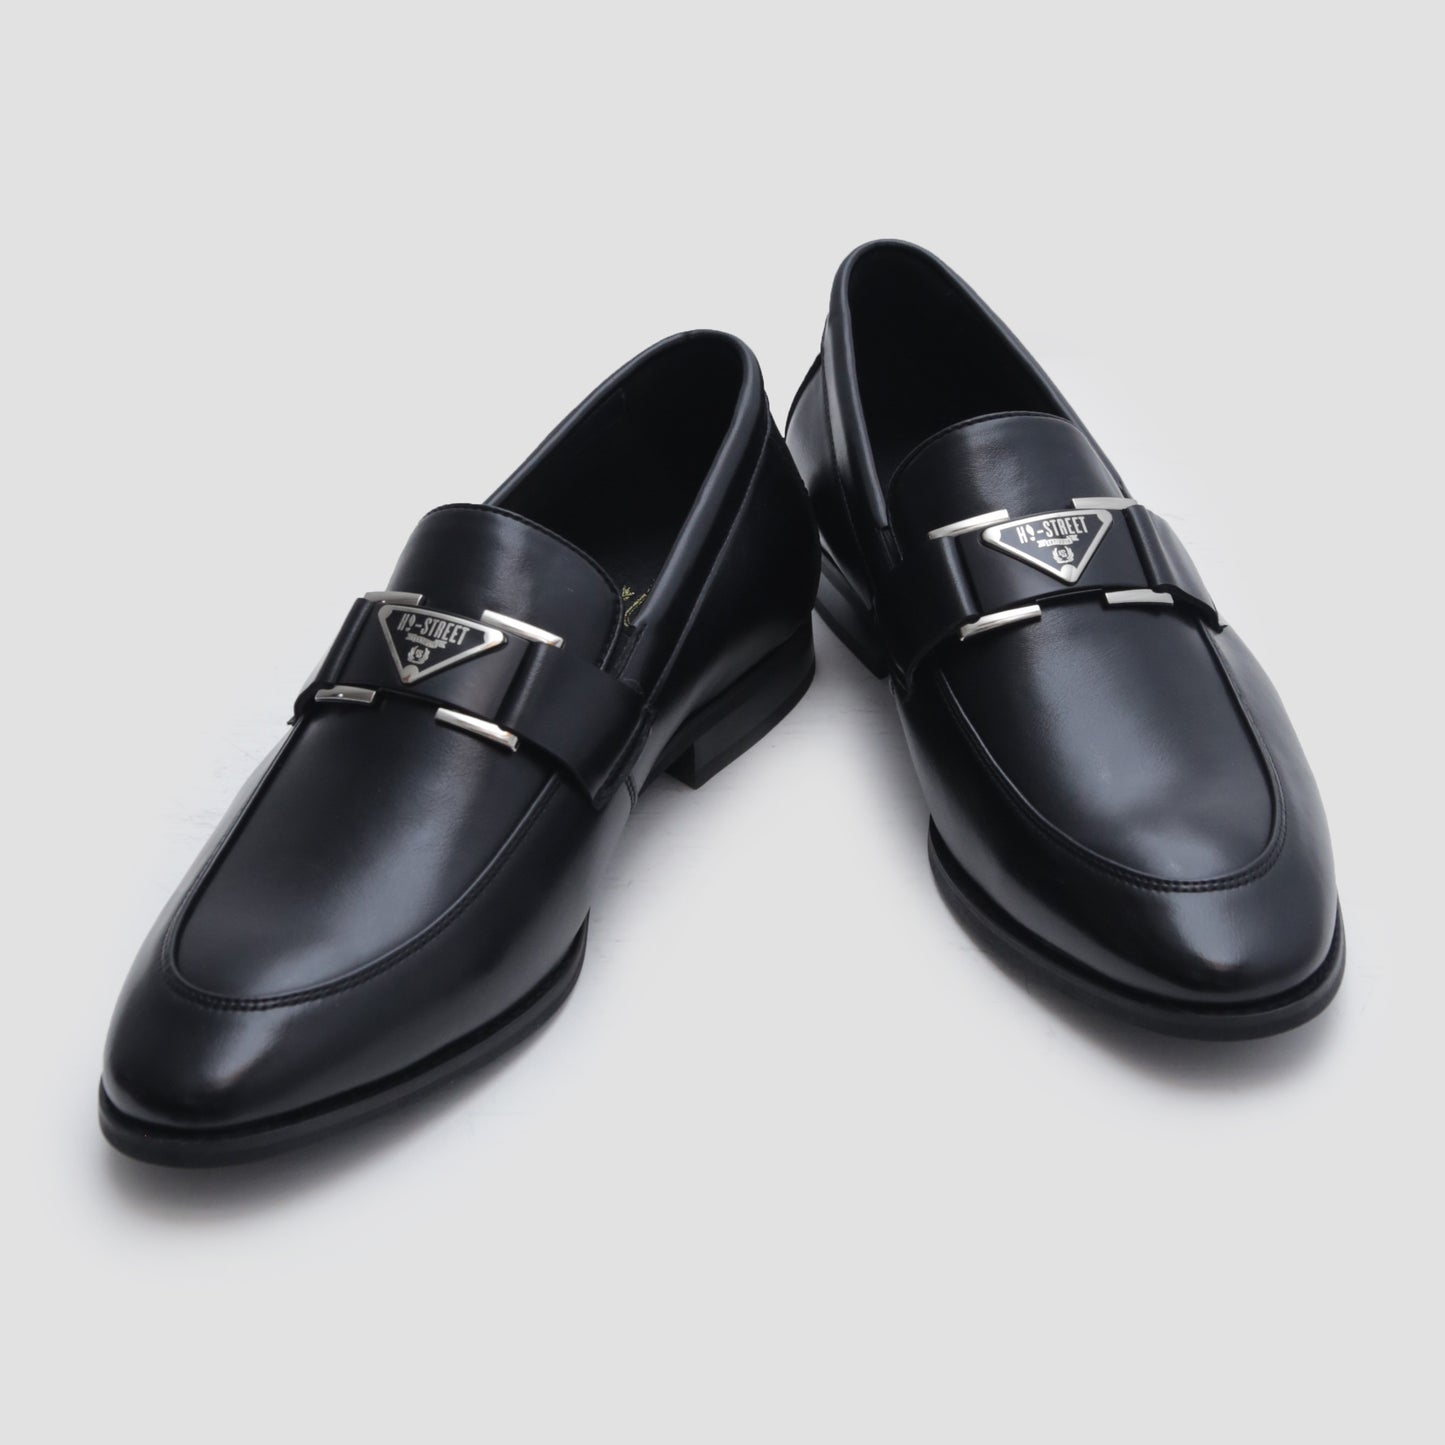 BLACK SHOES WITH BUCKLE